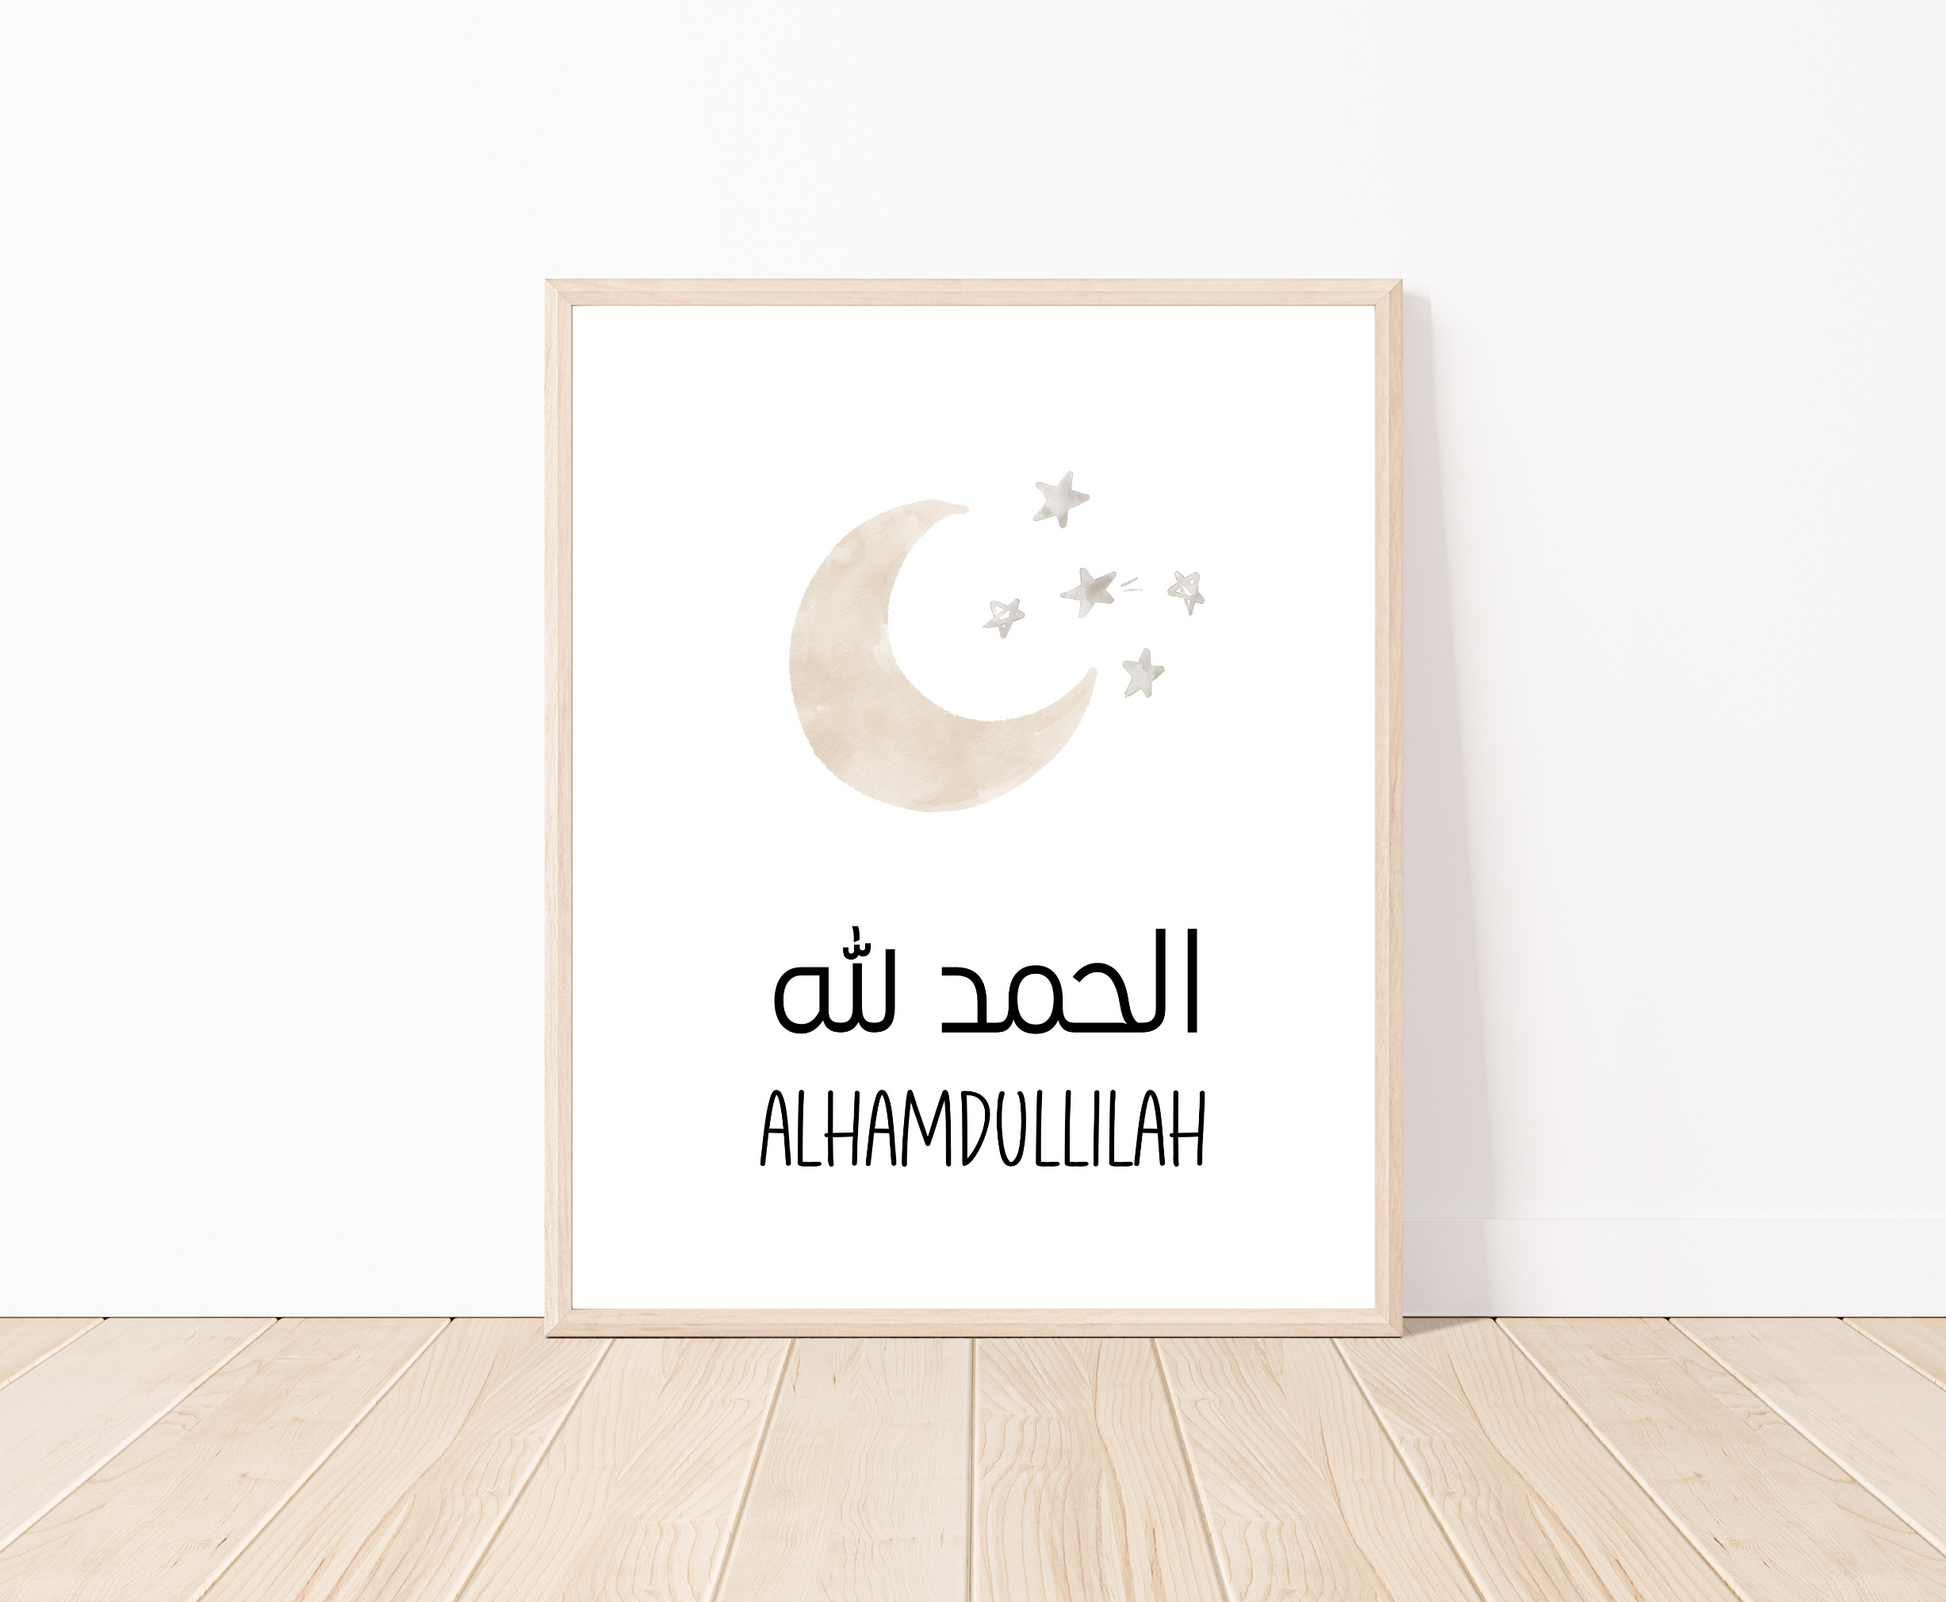 A digital poster that is placed on a white wall and parquet flooring shows a light brown crescent and some tiny stars with “Alhamdulillah” written in both Arabic and English right below.